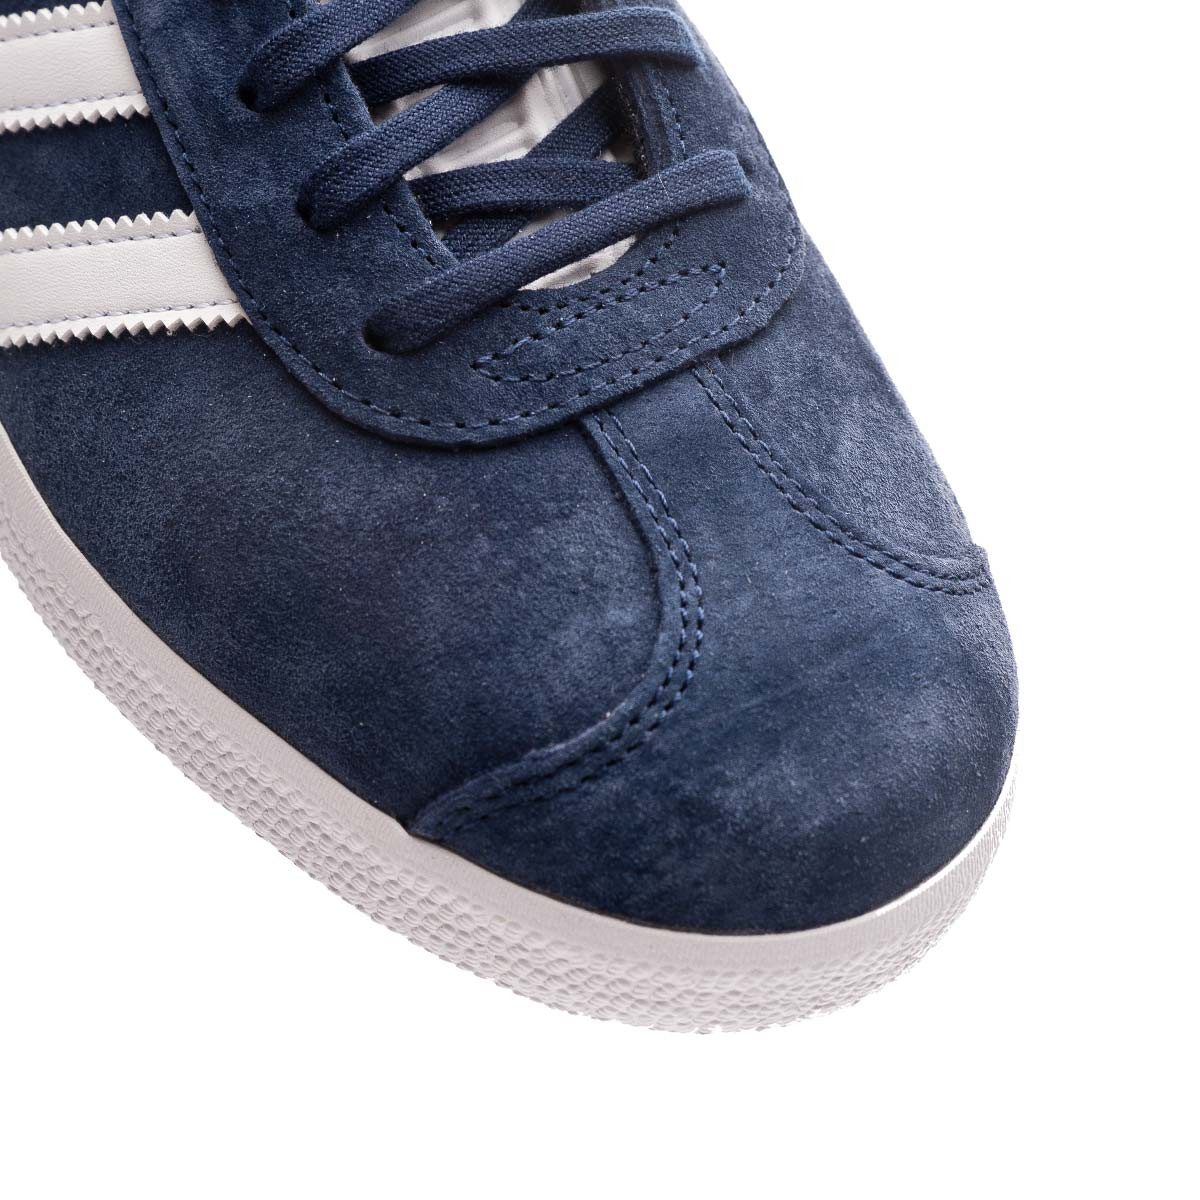 adidas gazelle trainers navy gold